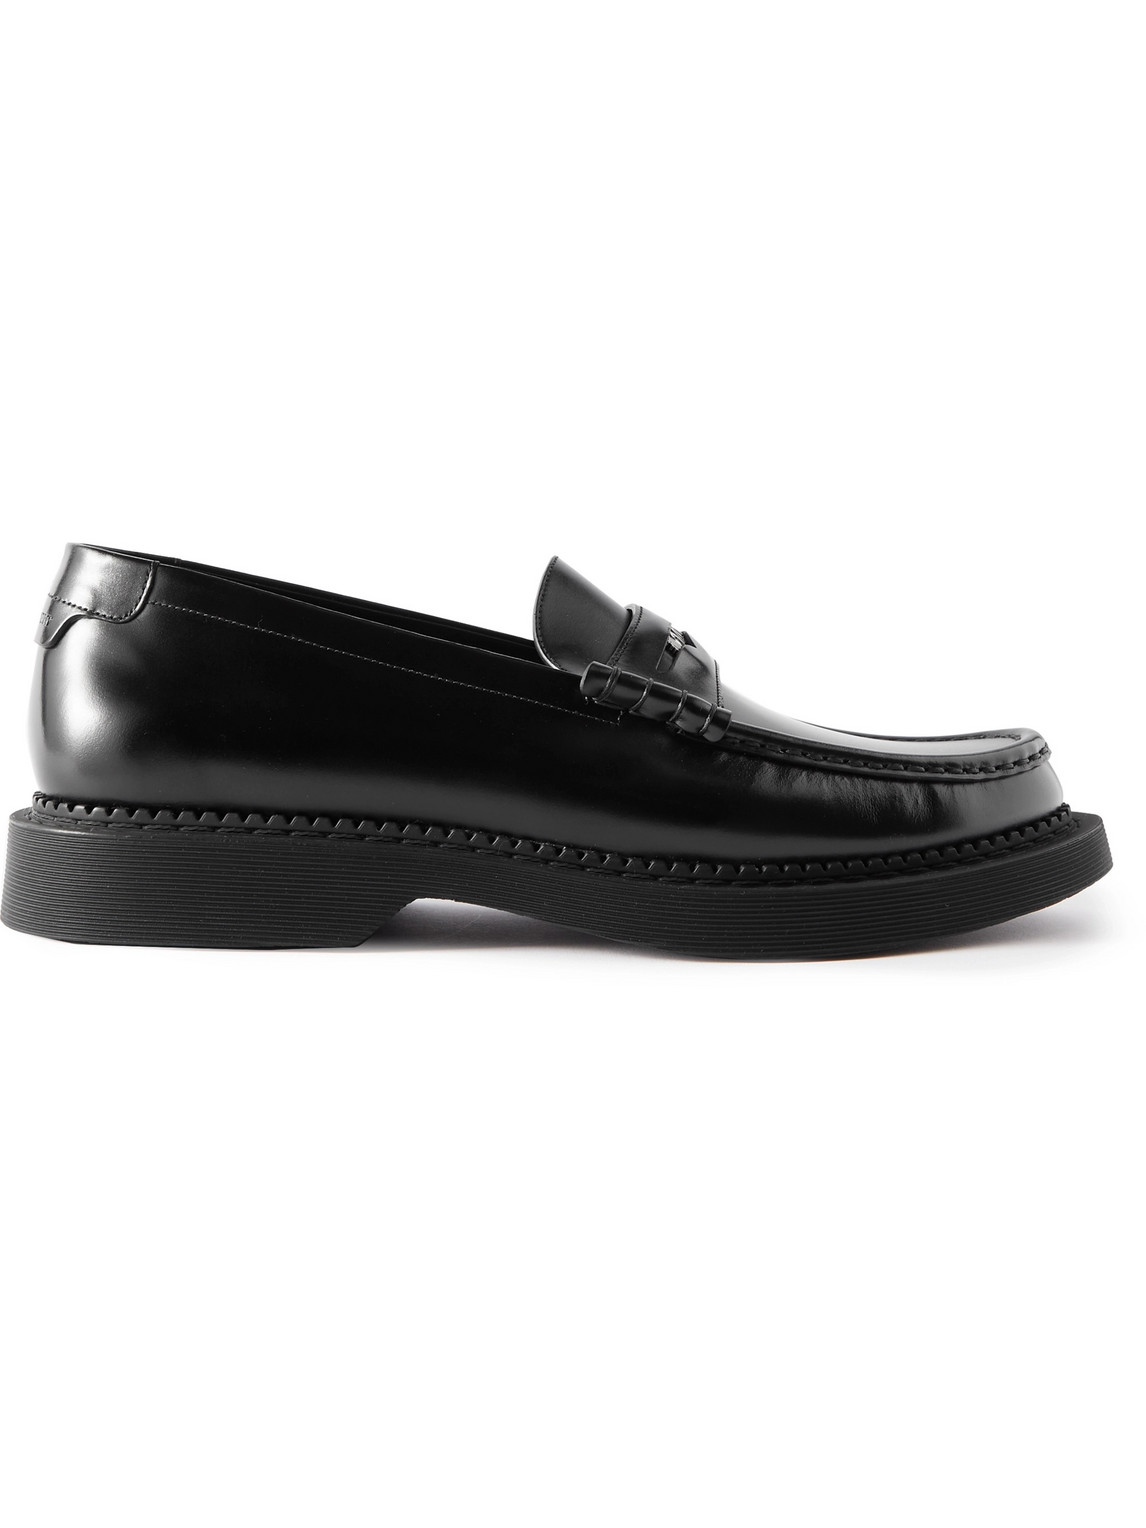 SAINT LAURENT Anthony Embellished Leather Penny Loafers